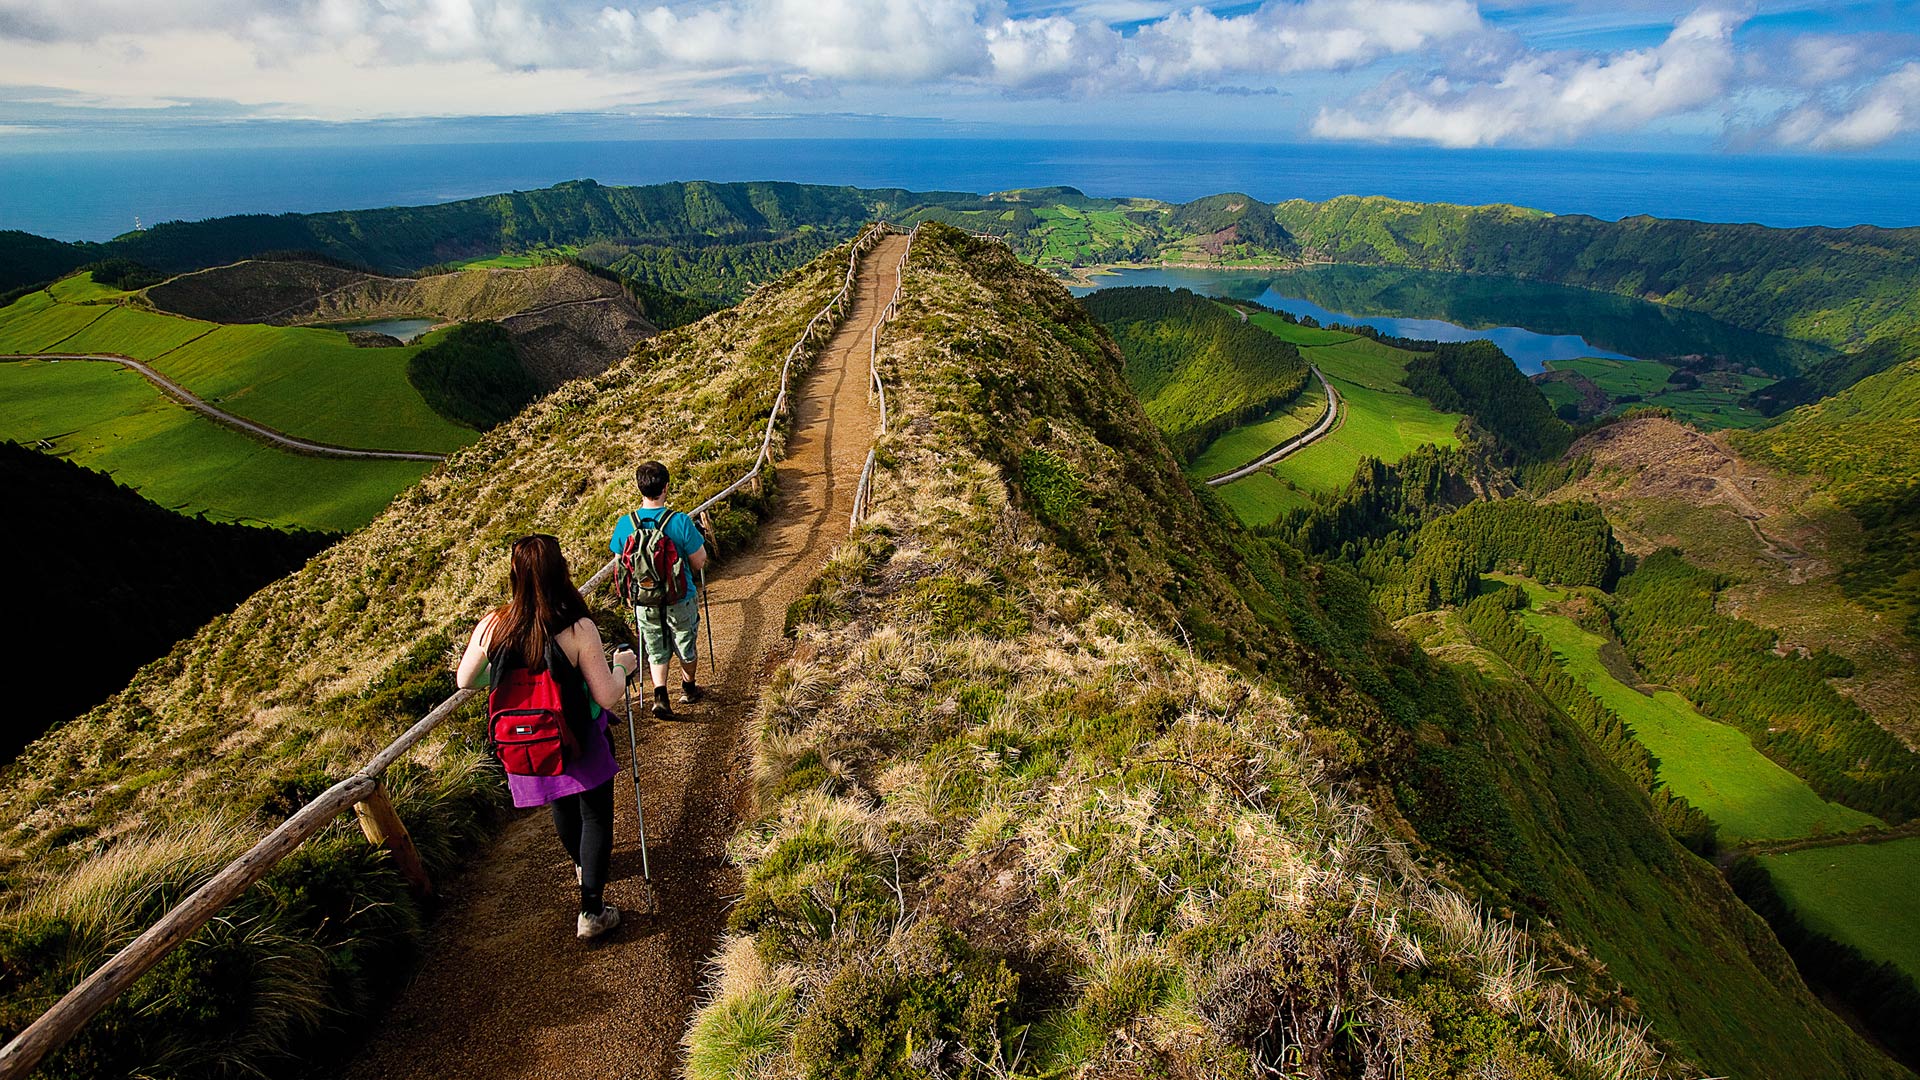 Bloomberg considers Azores the new Iceland